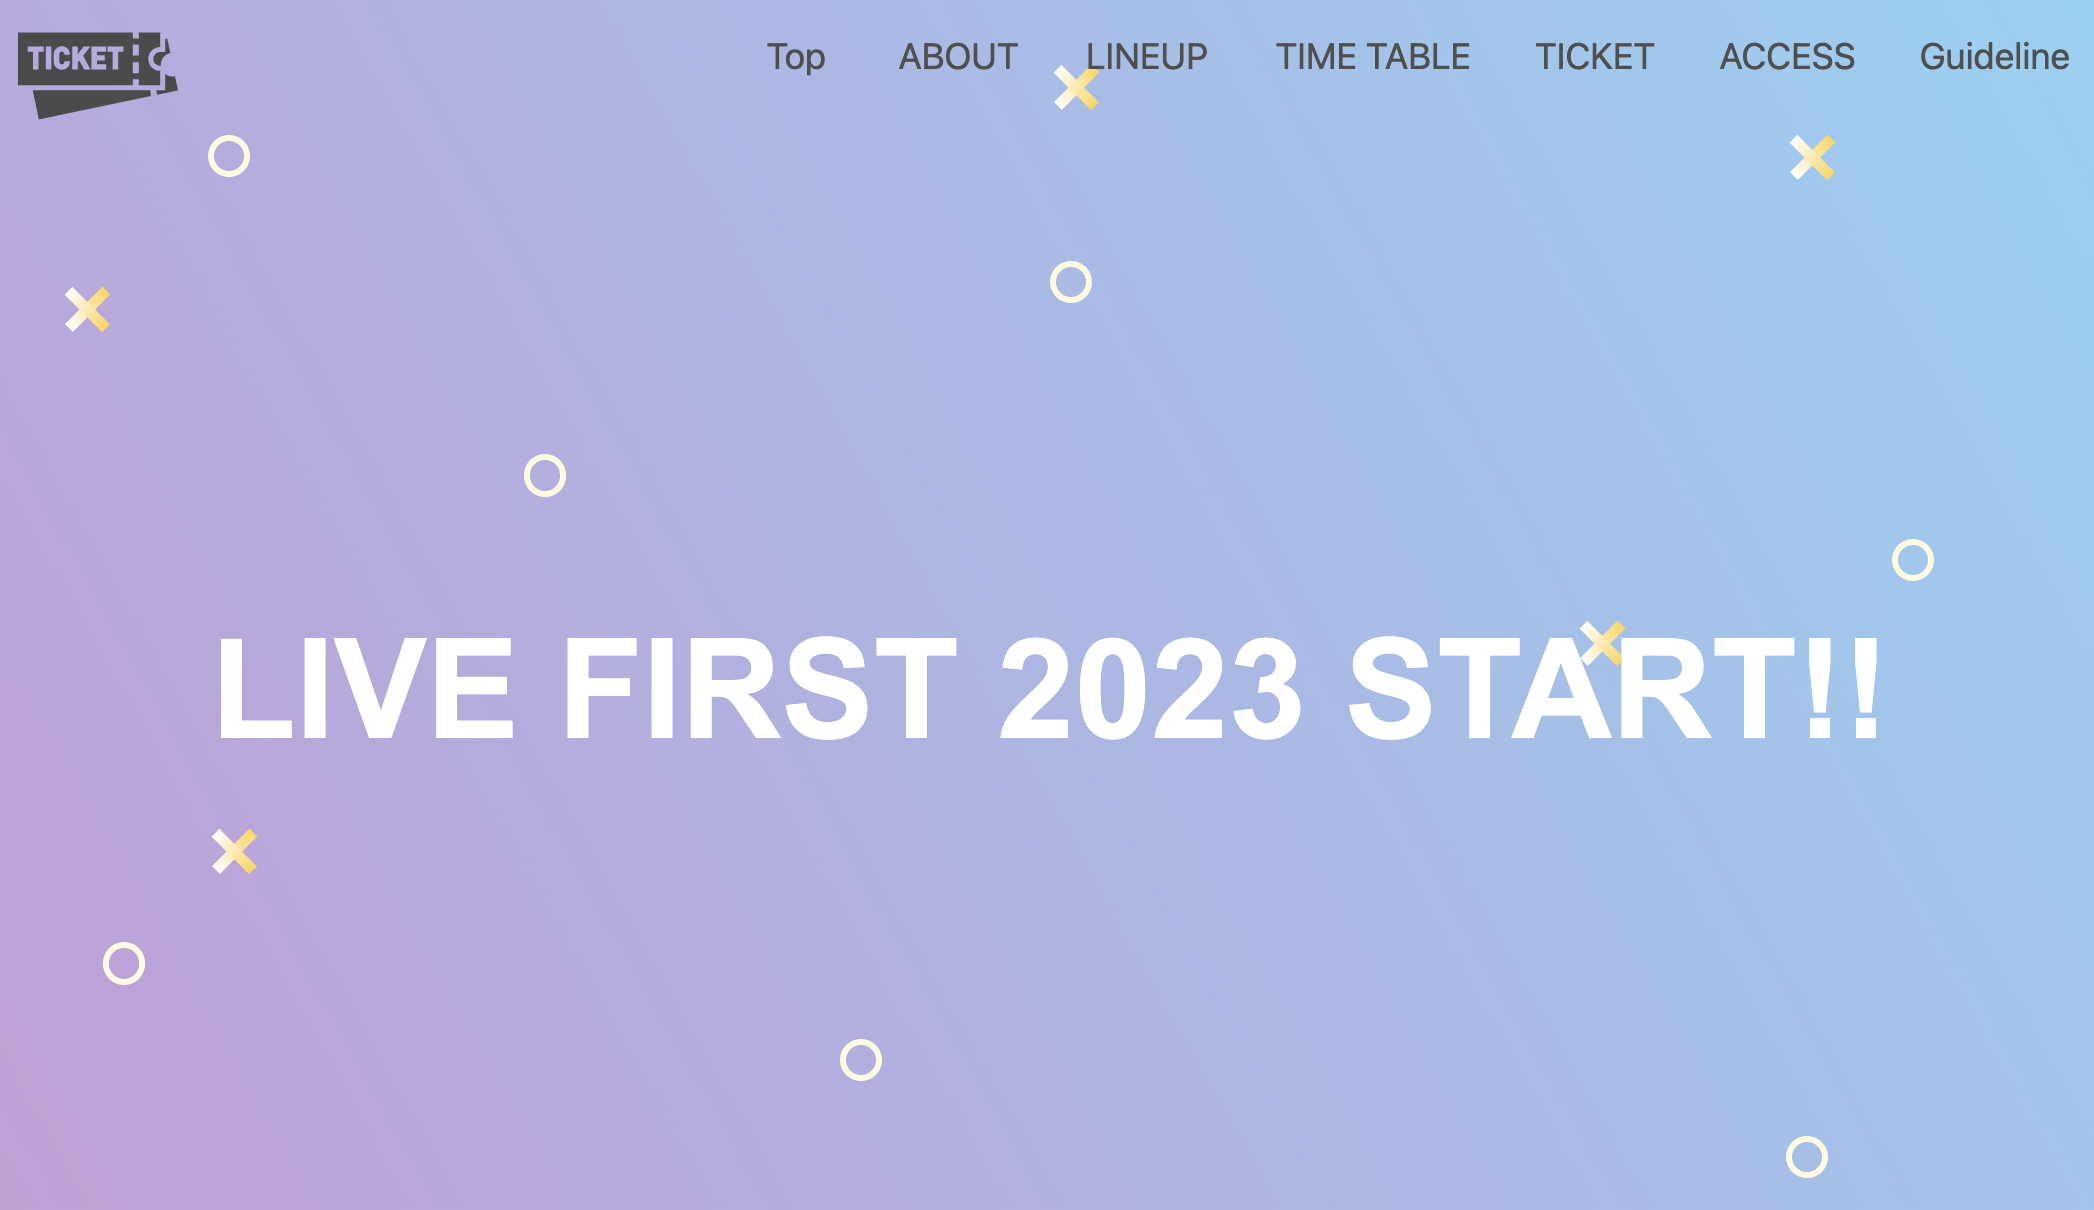 LIVE FIRST 2023